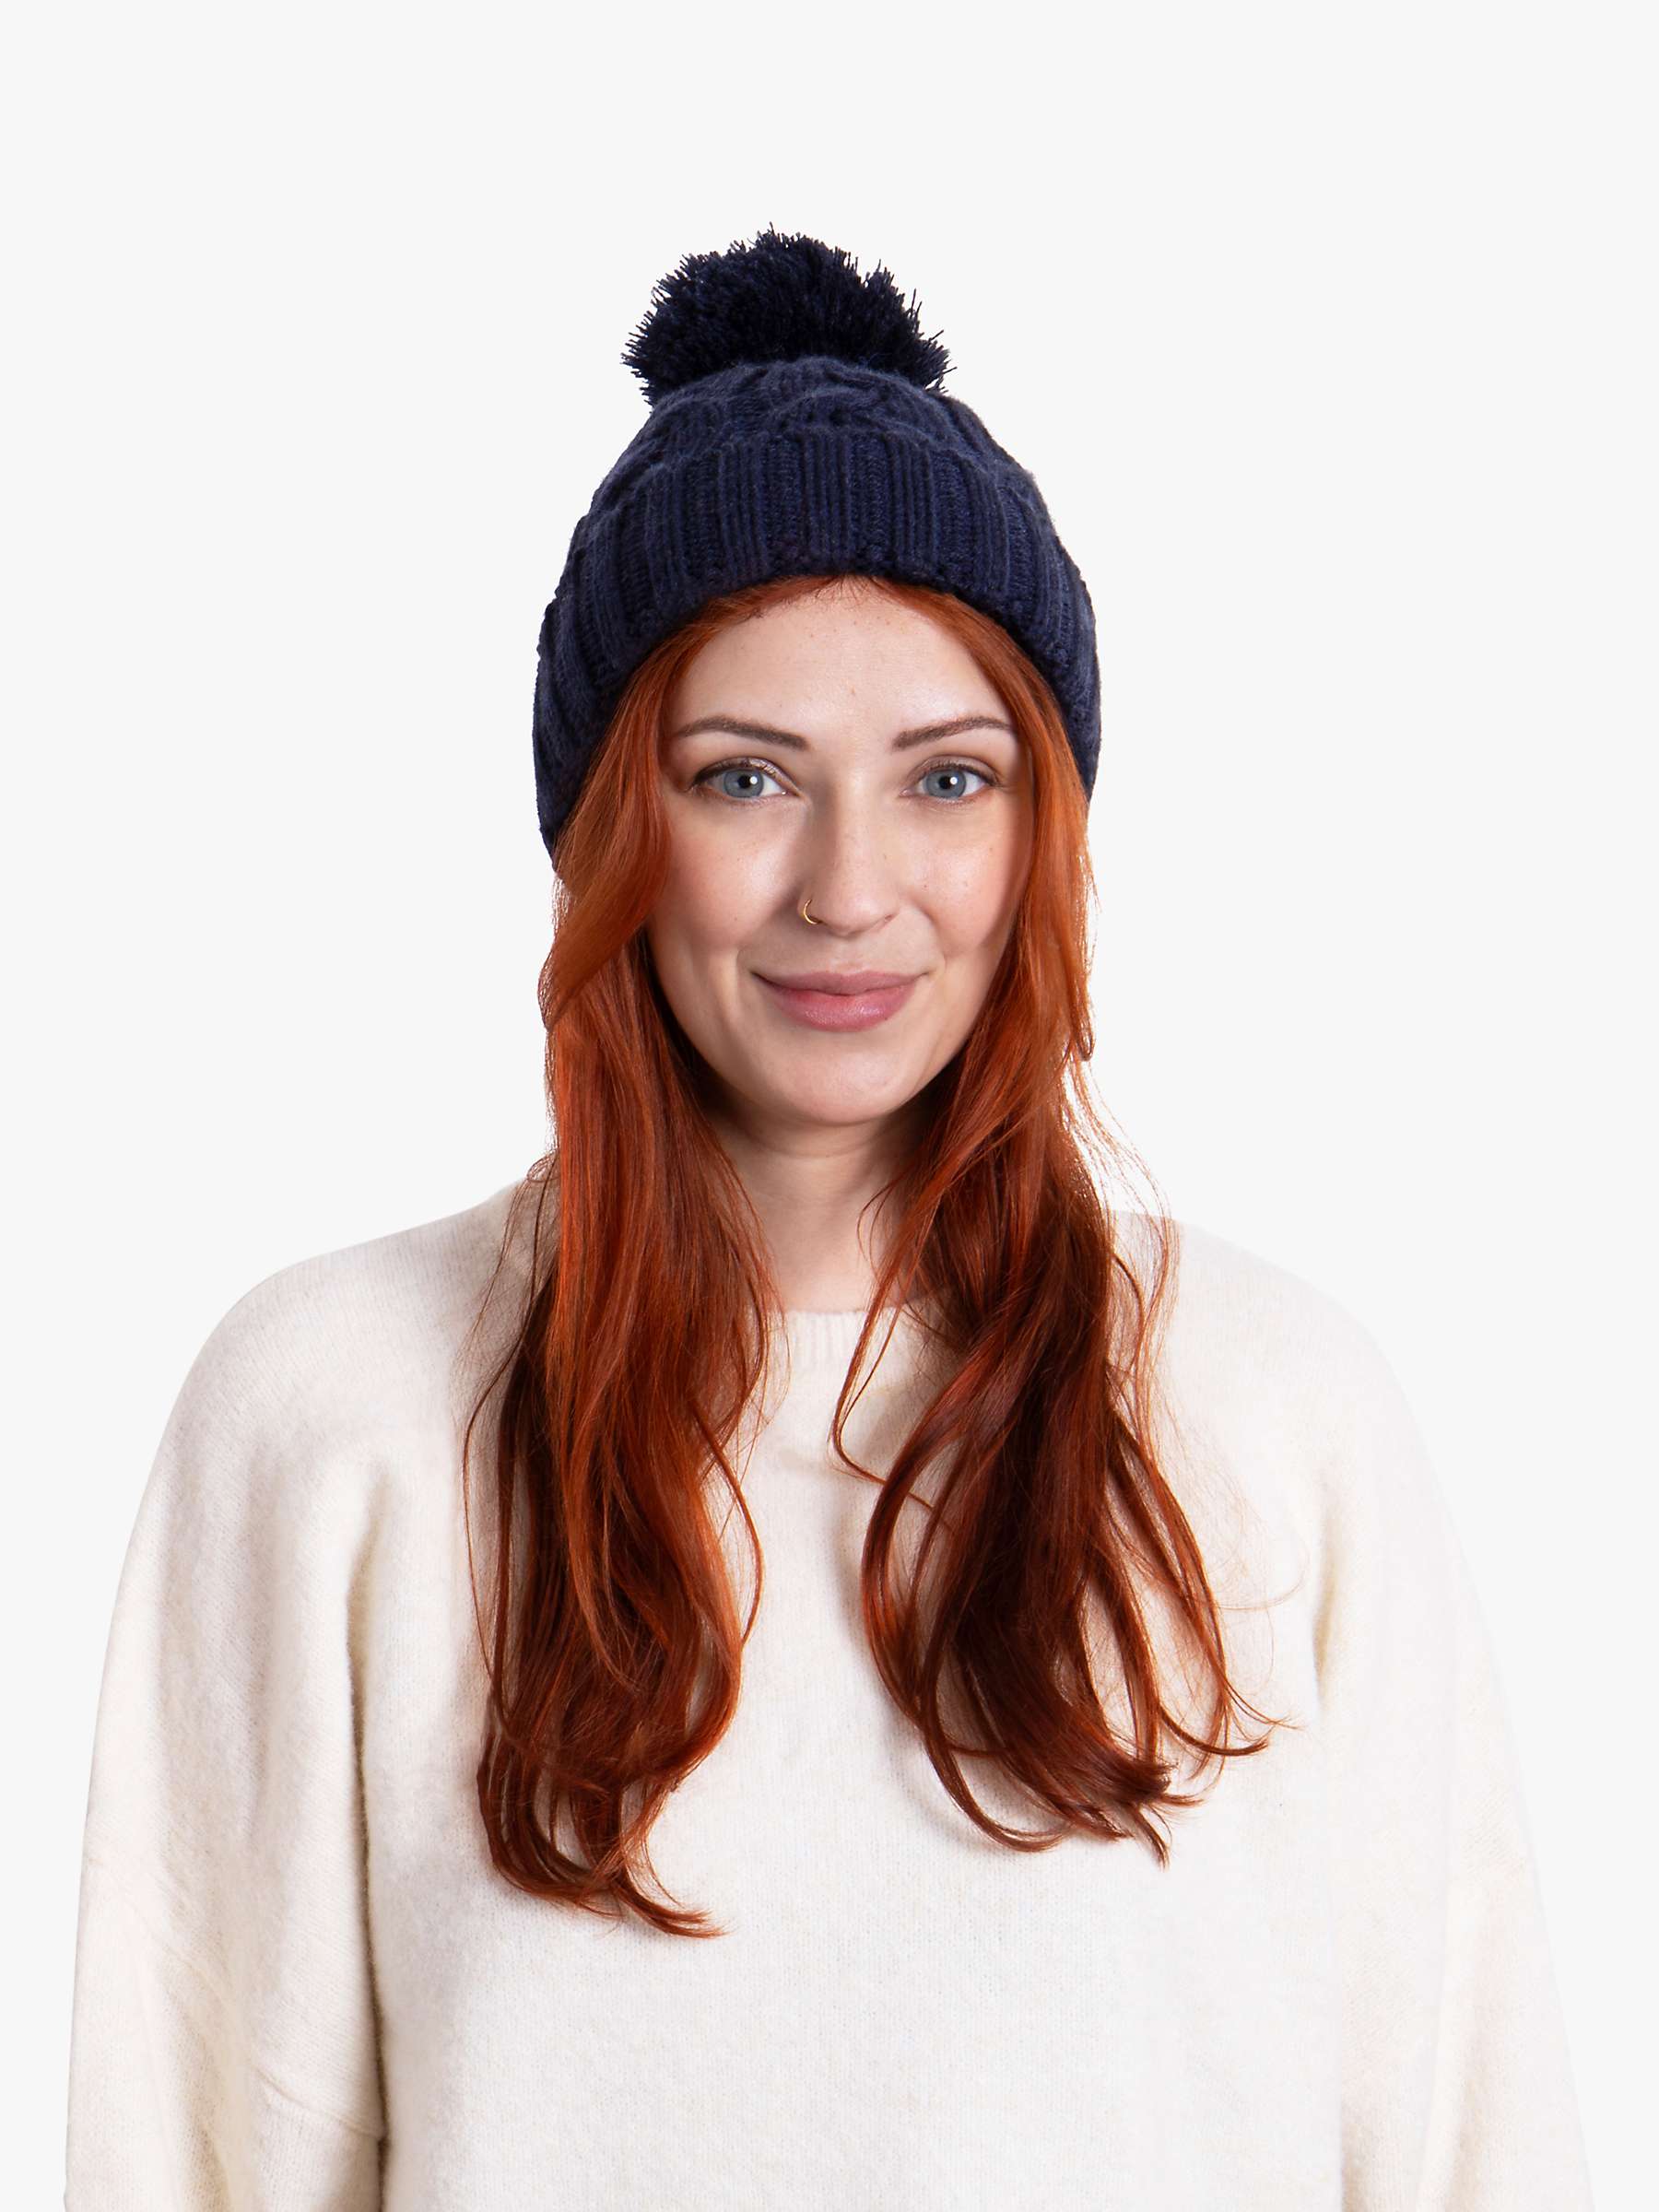 Buy totes Cable Knit Pom Pom Beanie Hat Online at johnlewis.com